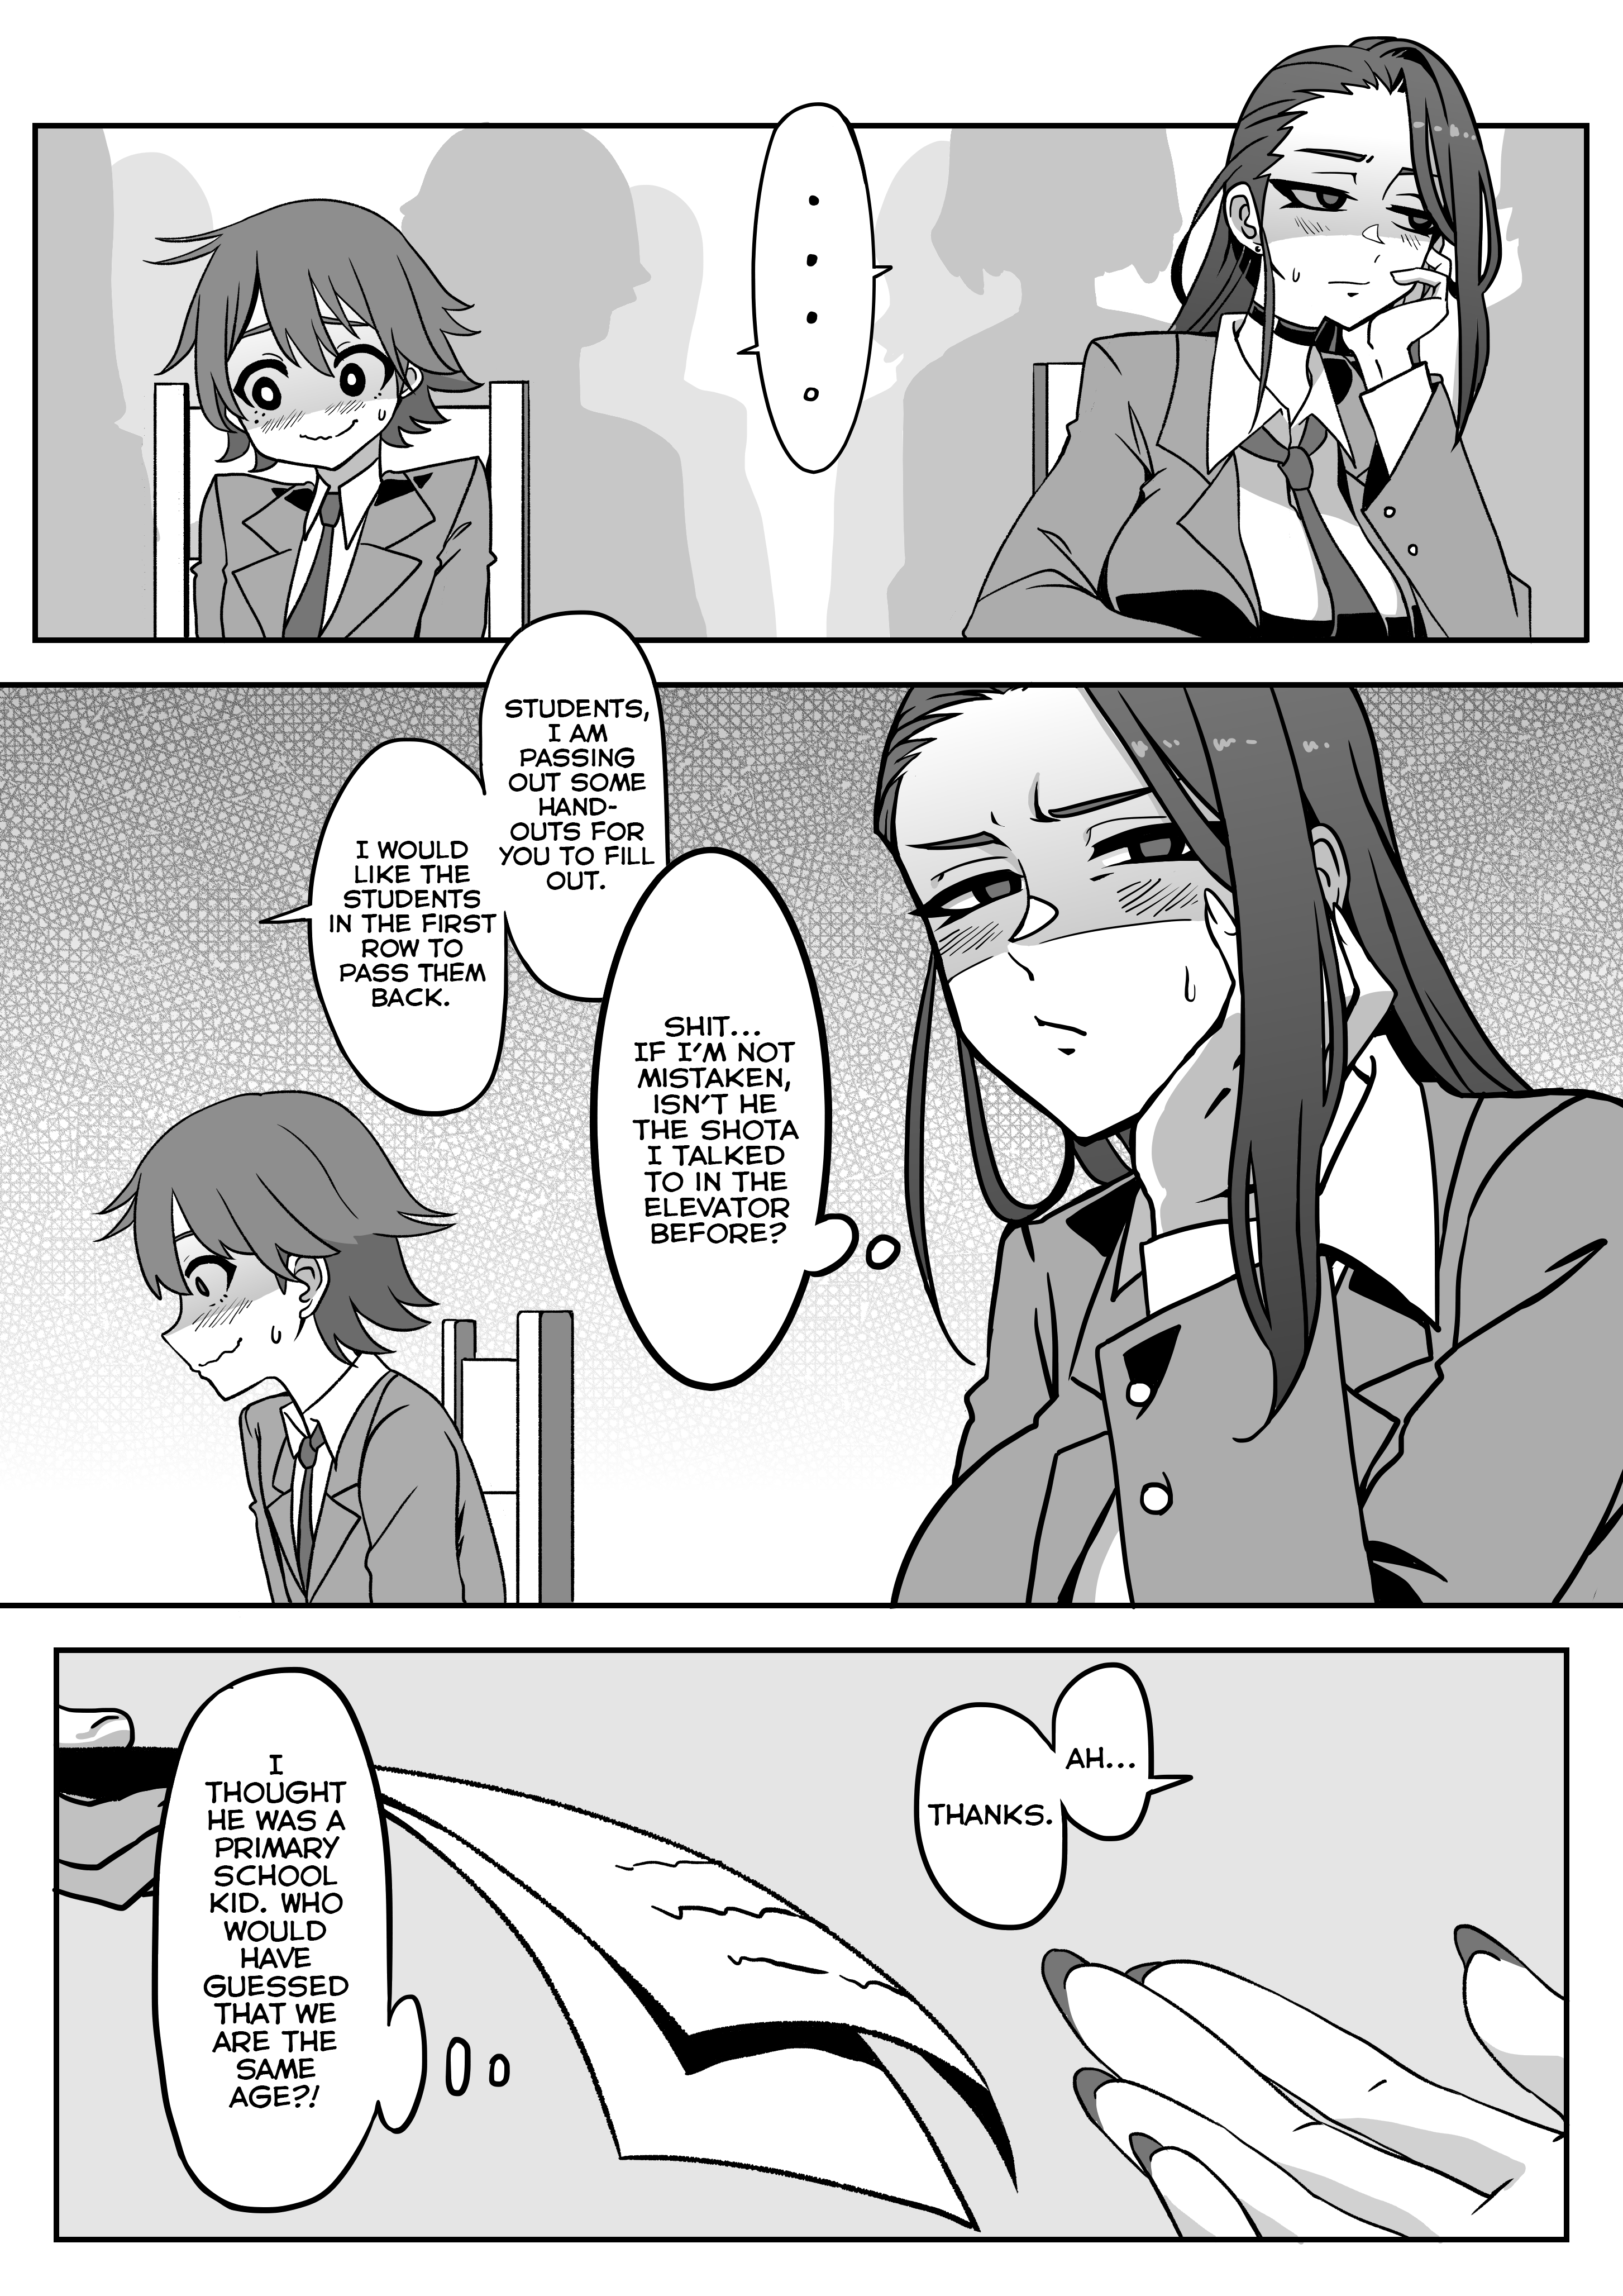 Something Naughty Would Happen If They Knew Each Other's Thoughts - chapter 2 - #3